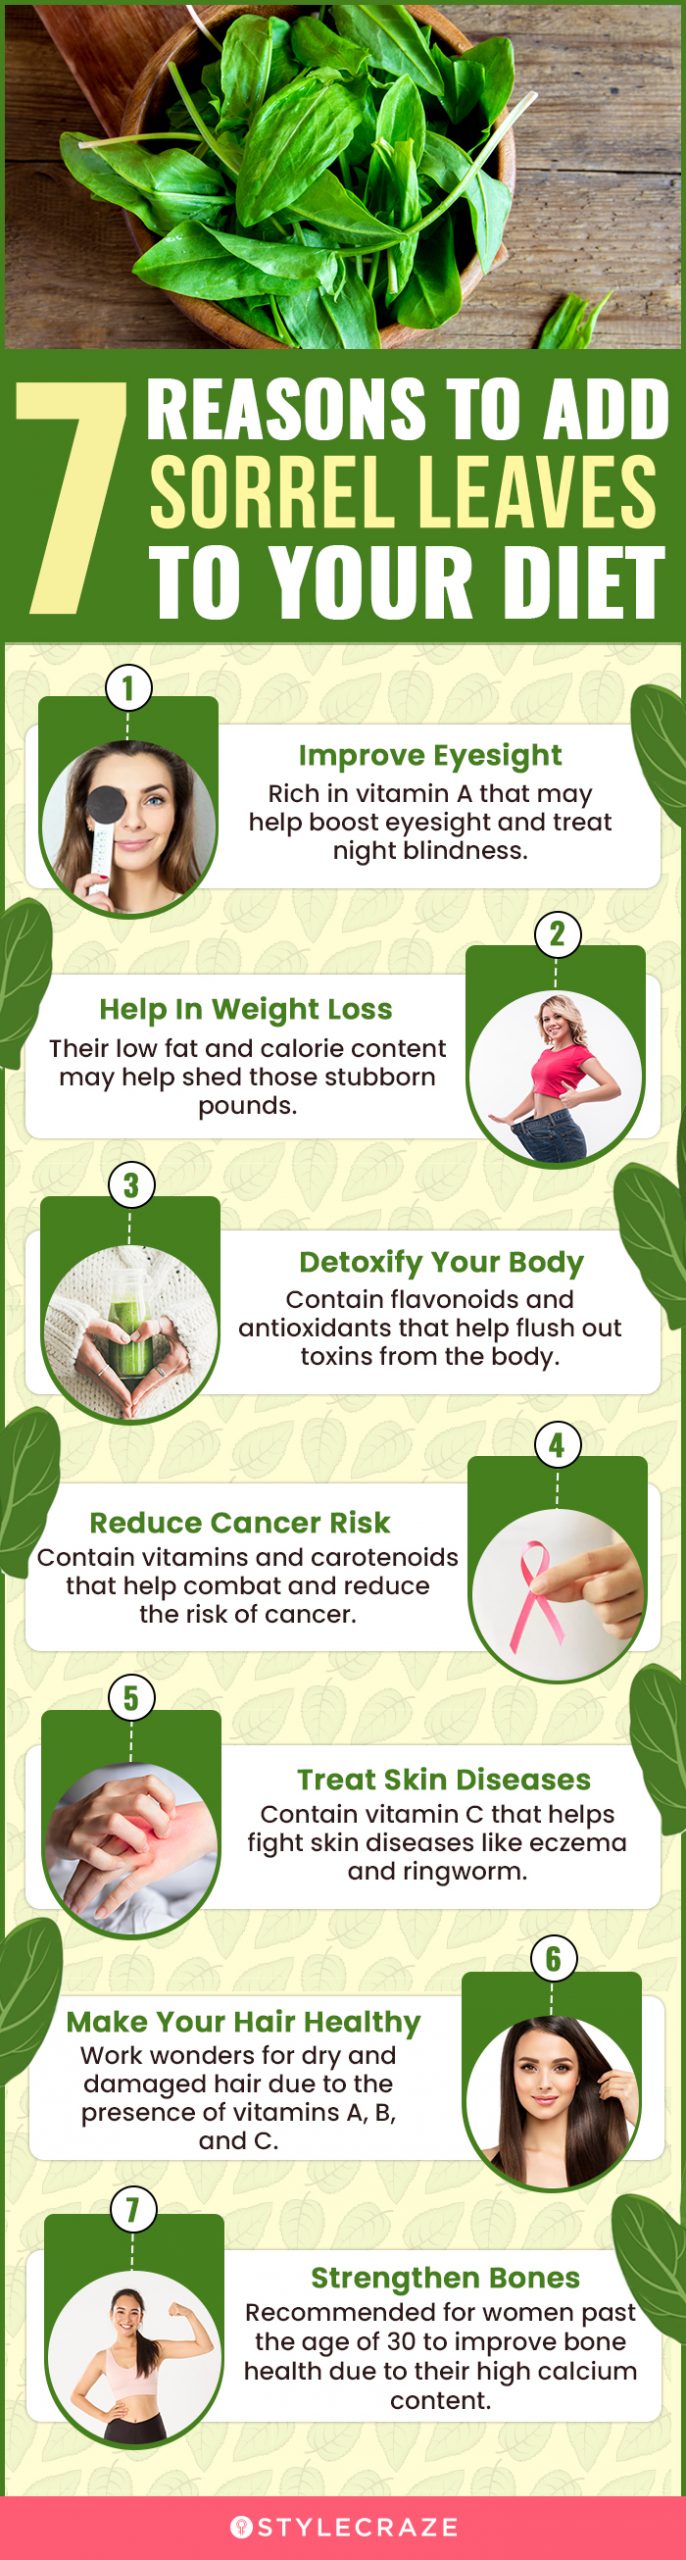 7 reasons to add sorrel leaves to your diet [infographic]